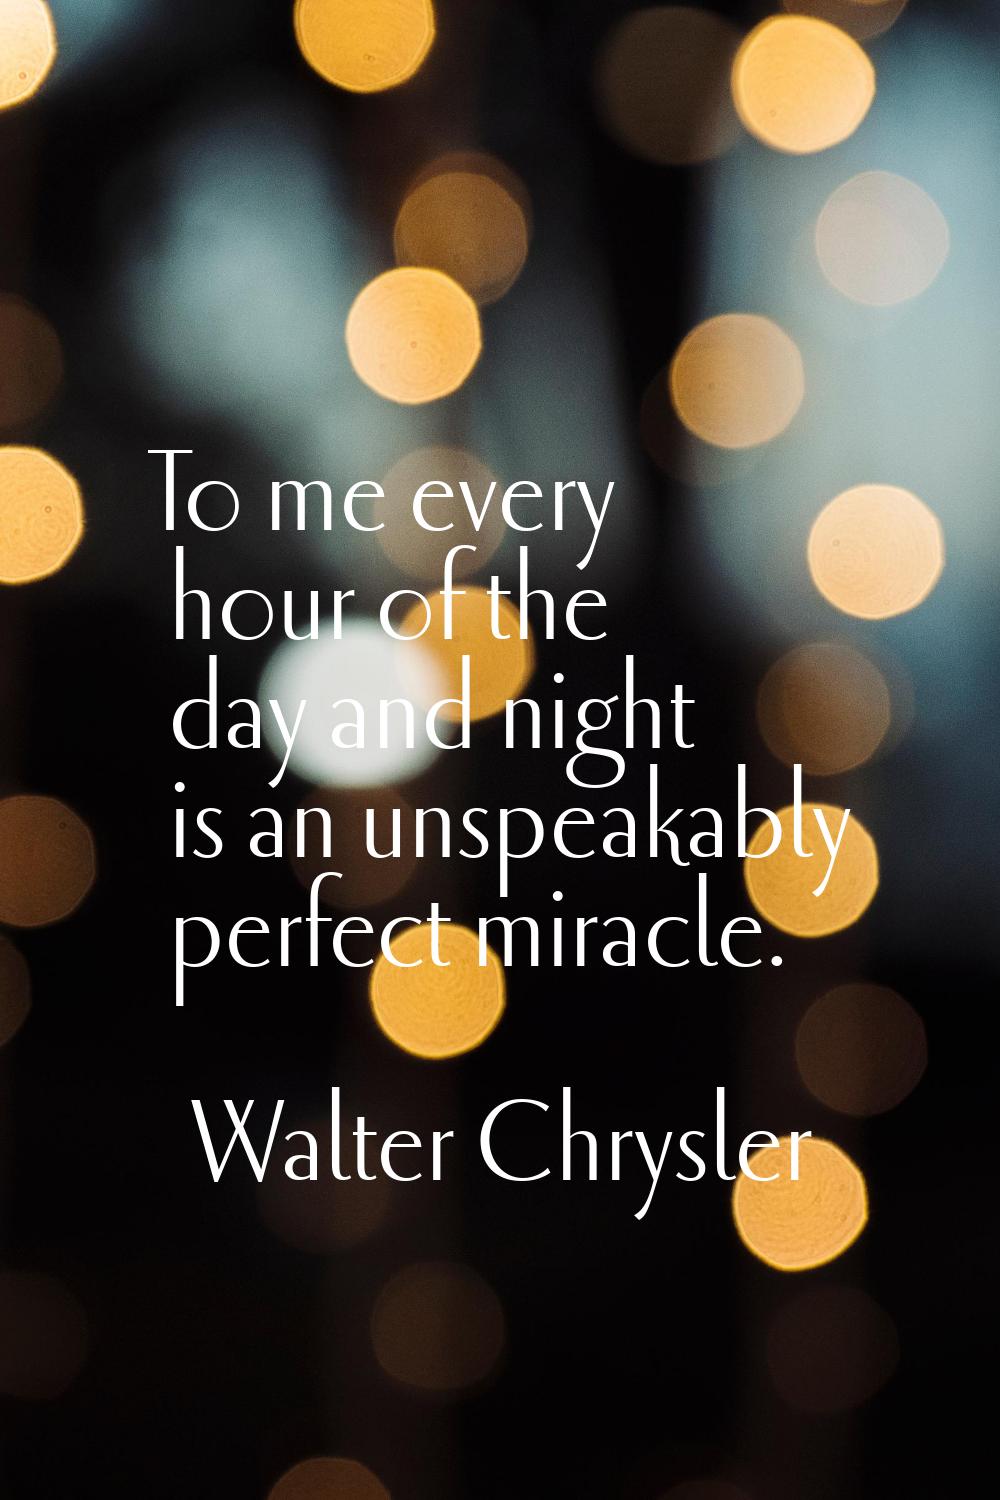 To me every hour of the day and night is an unspeakably perfect miracle.